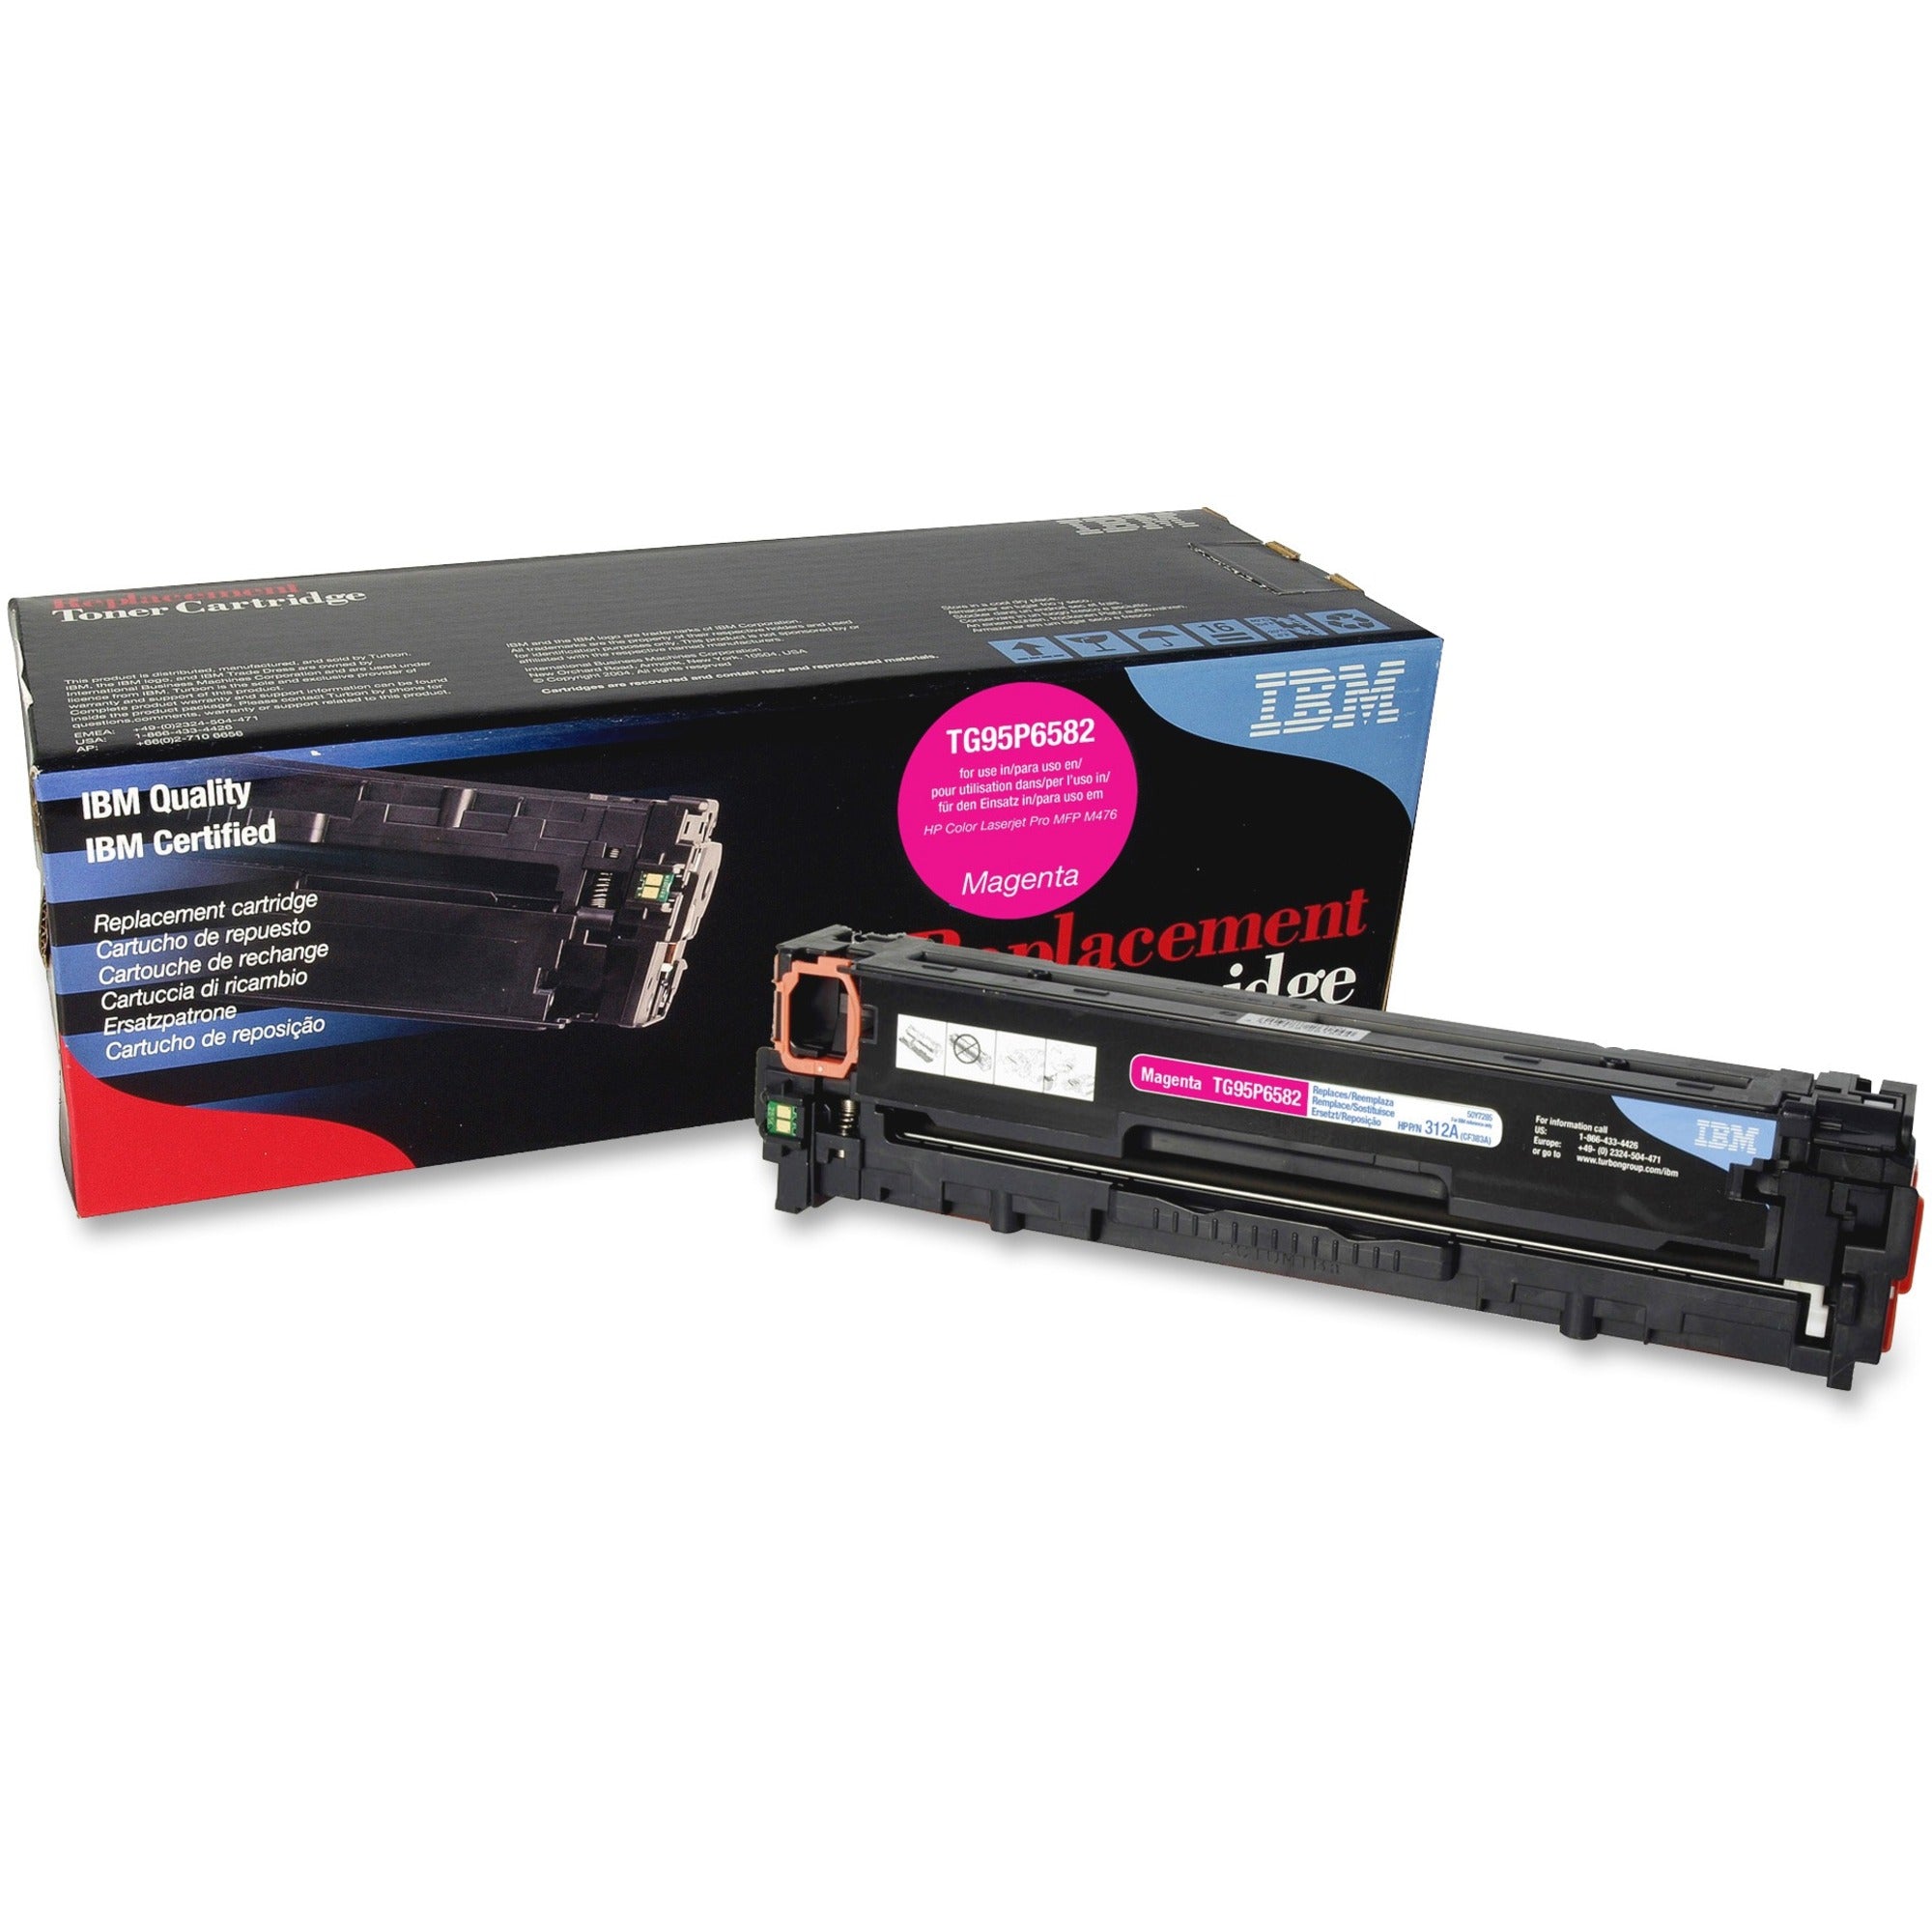 IBM Remanufactured Toner Cartridge - Alternative for HP 312A (CF383A) - Laser - 2700 Pages - Magenta - 1 Each - 